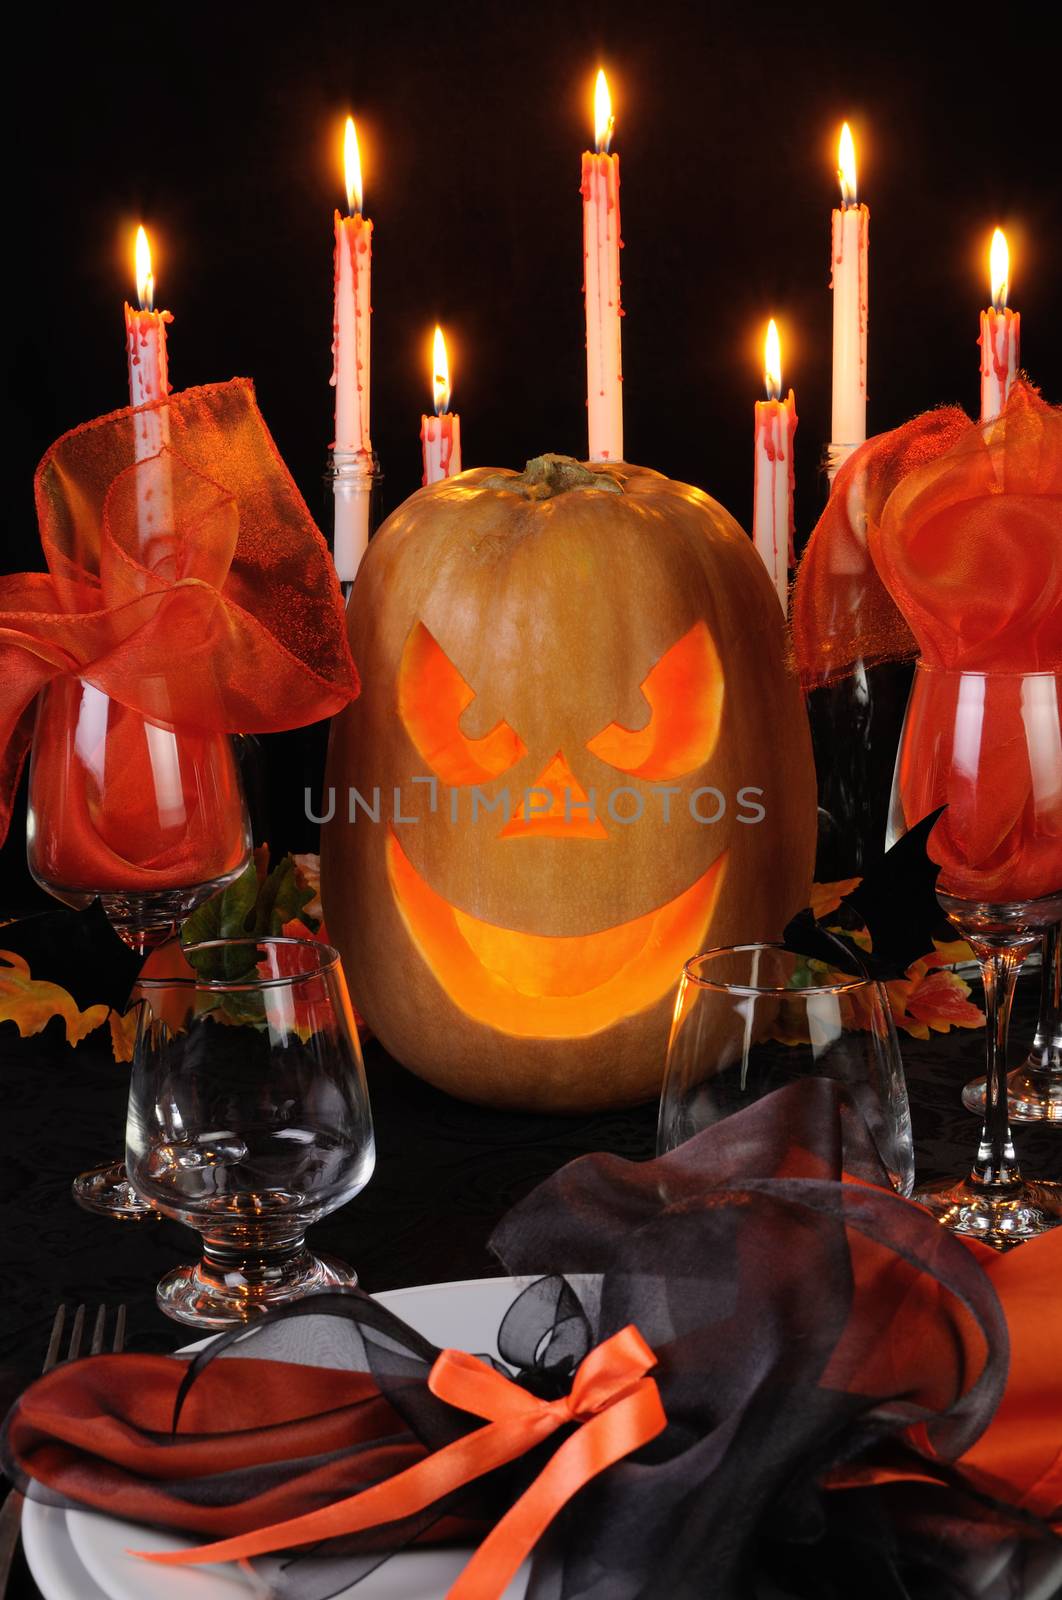 Pumpkin as a major element of the table decoration for Halloween